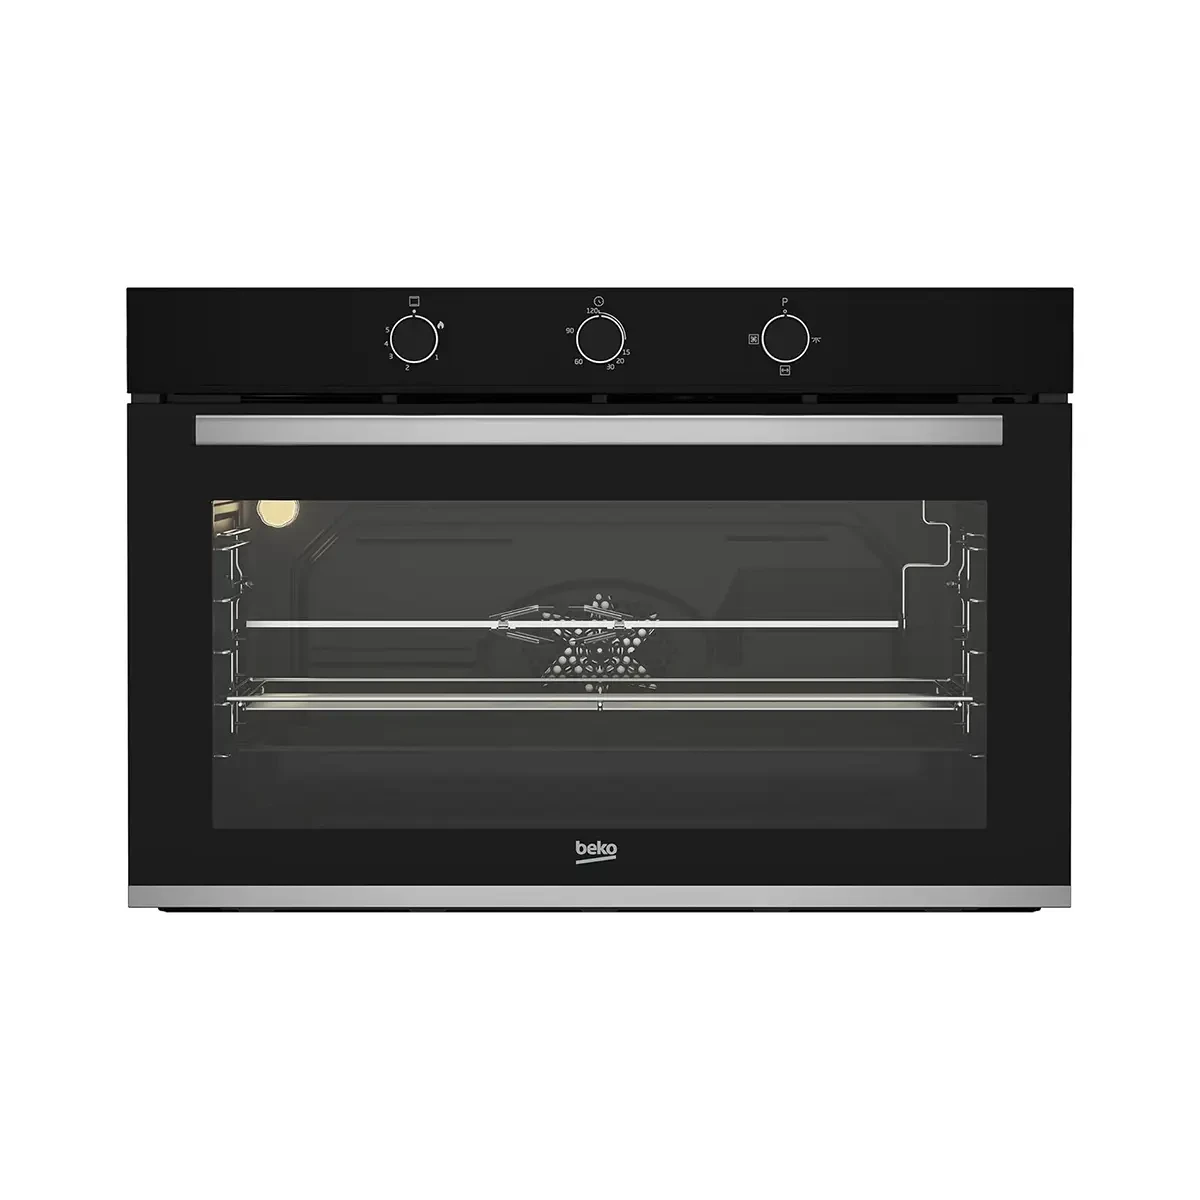 Beko Gas Built-in Ovens 90cm - Gas Safety- Cooling Fan - Cooking fan Integrated Electronic Ignition